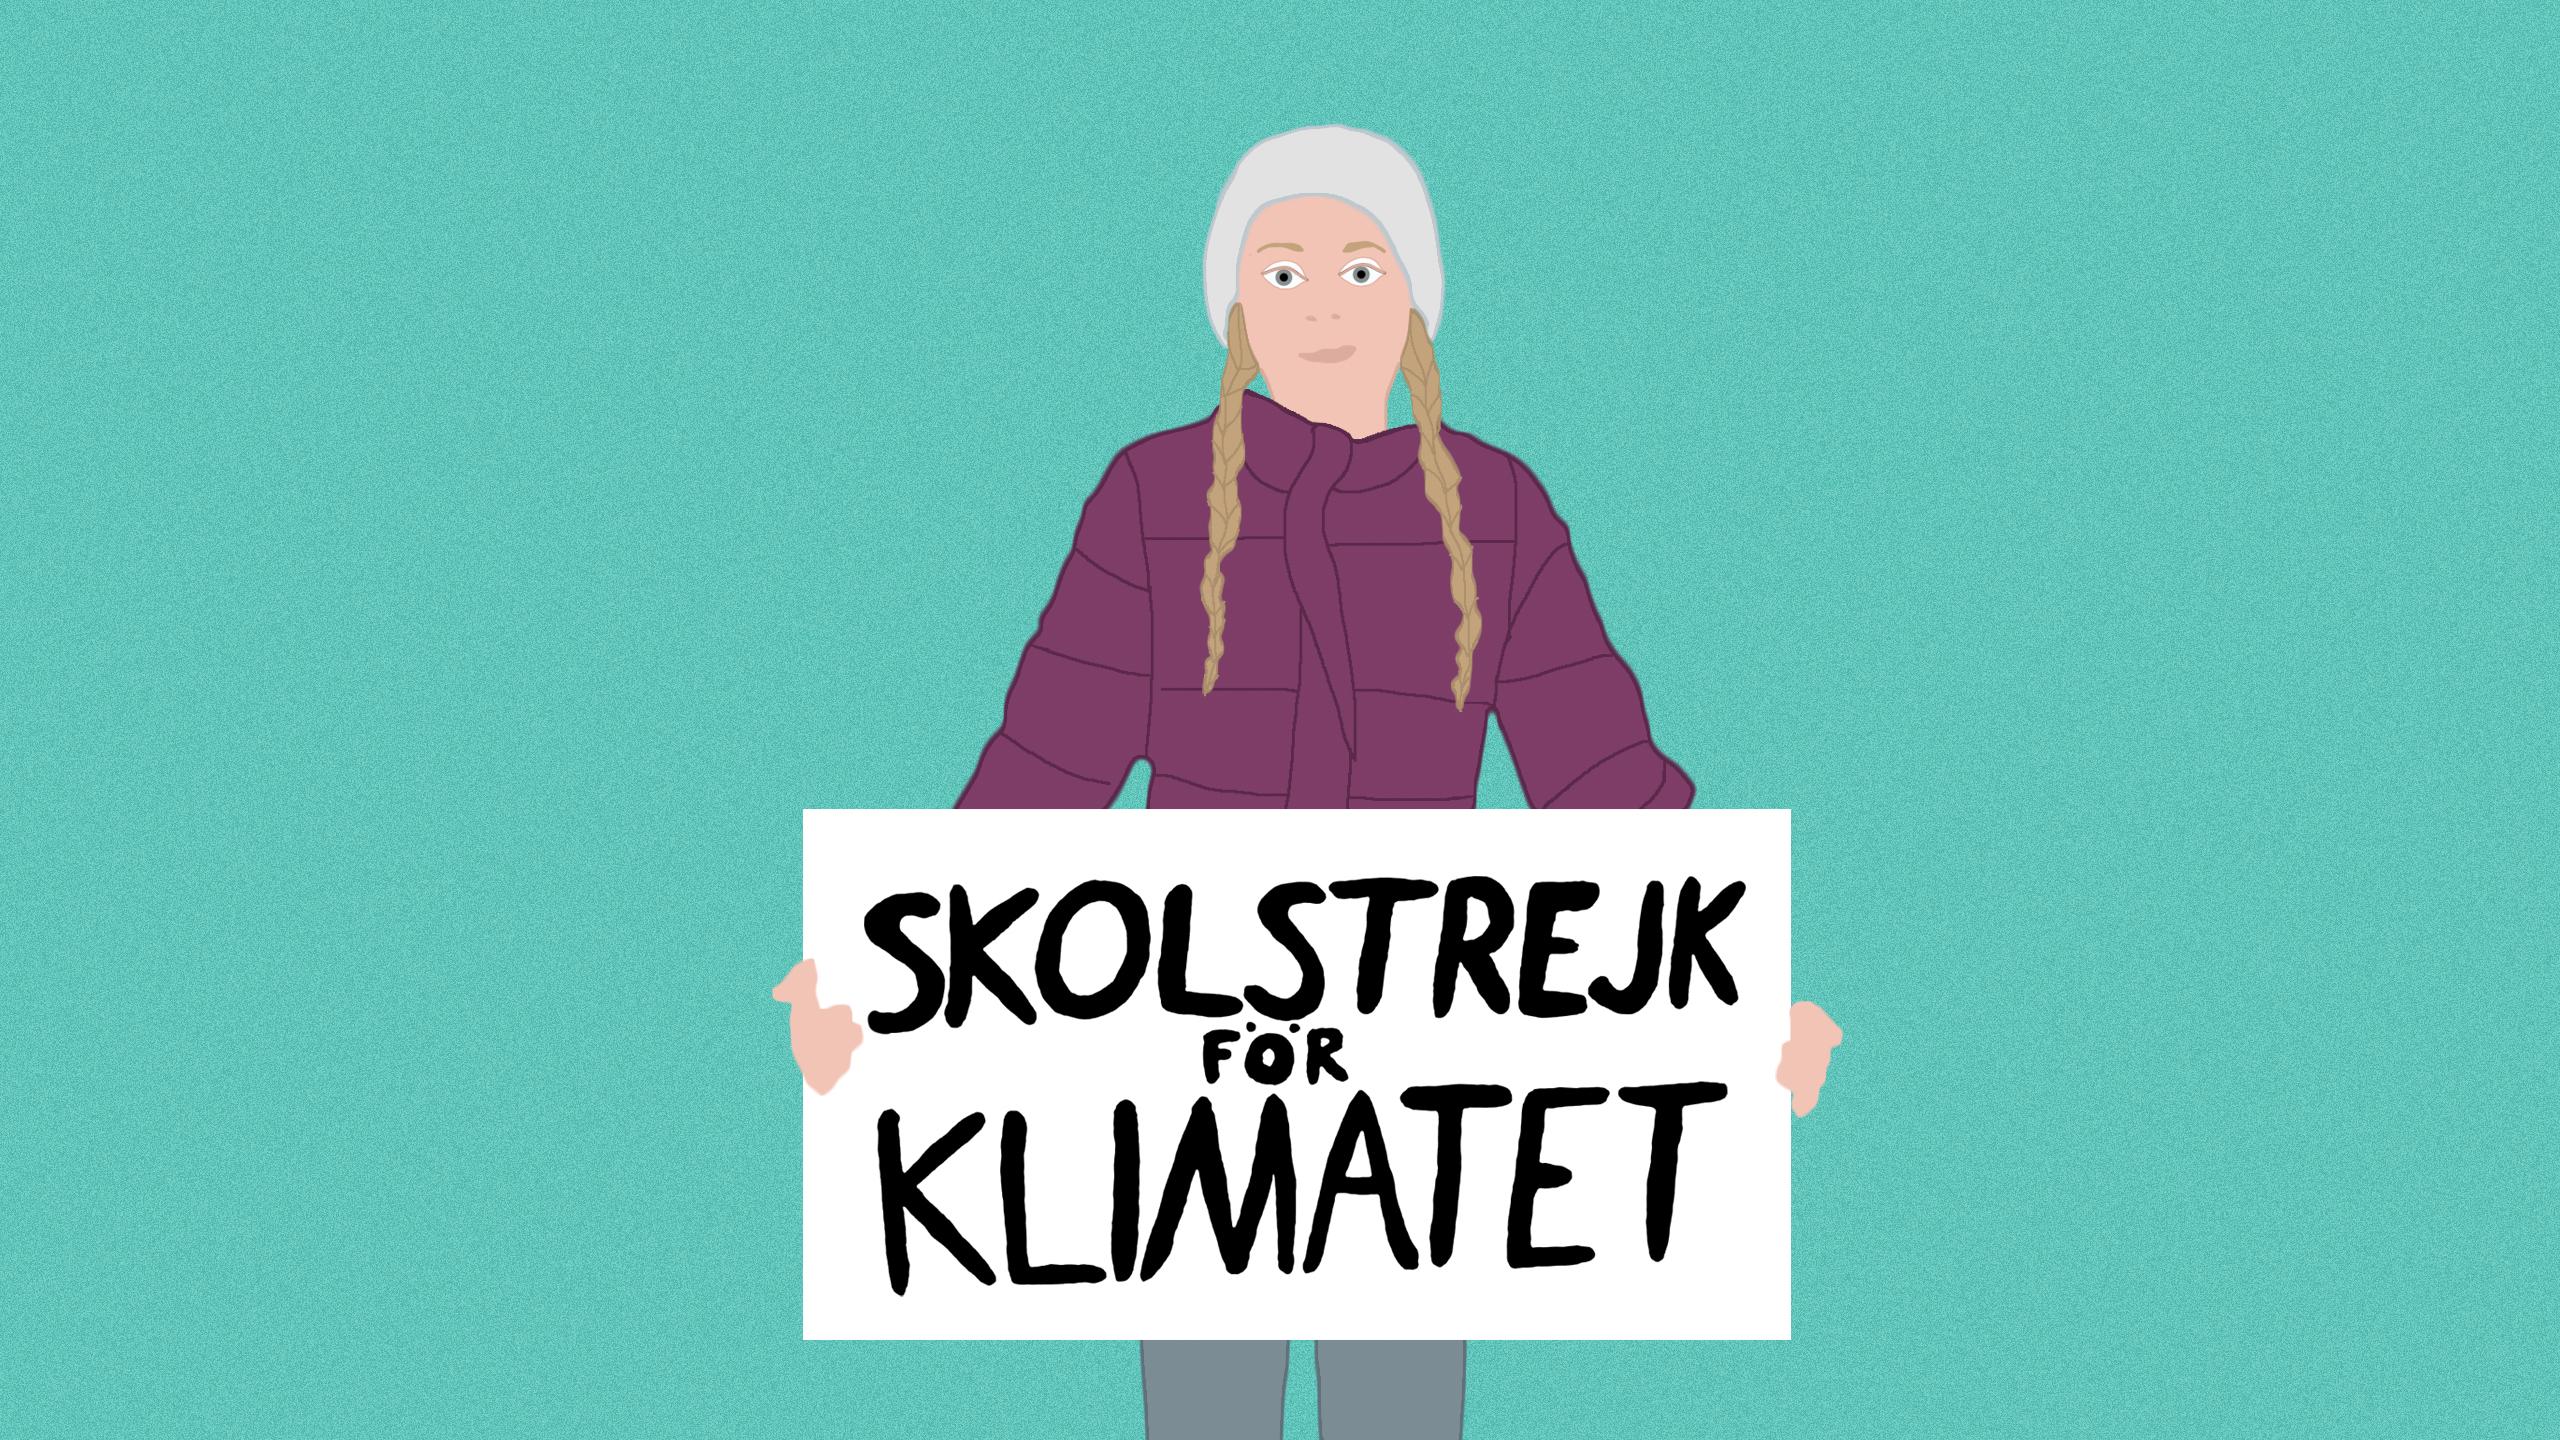 An illustration of young activist, Greta Thunberg holding up a protest sign